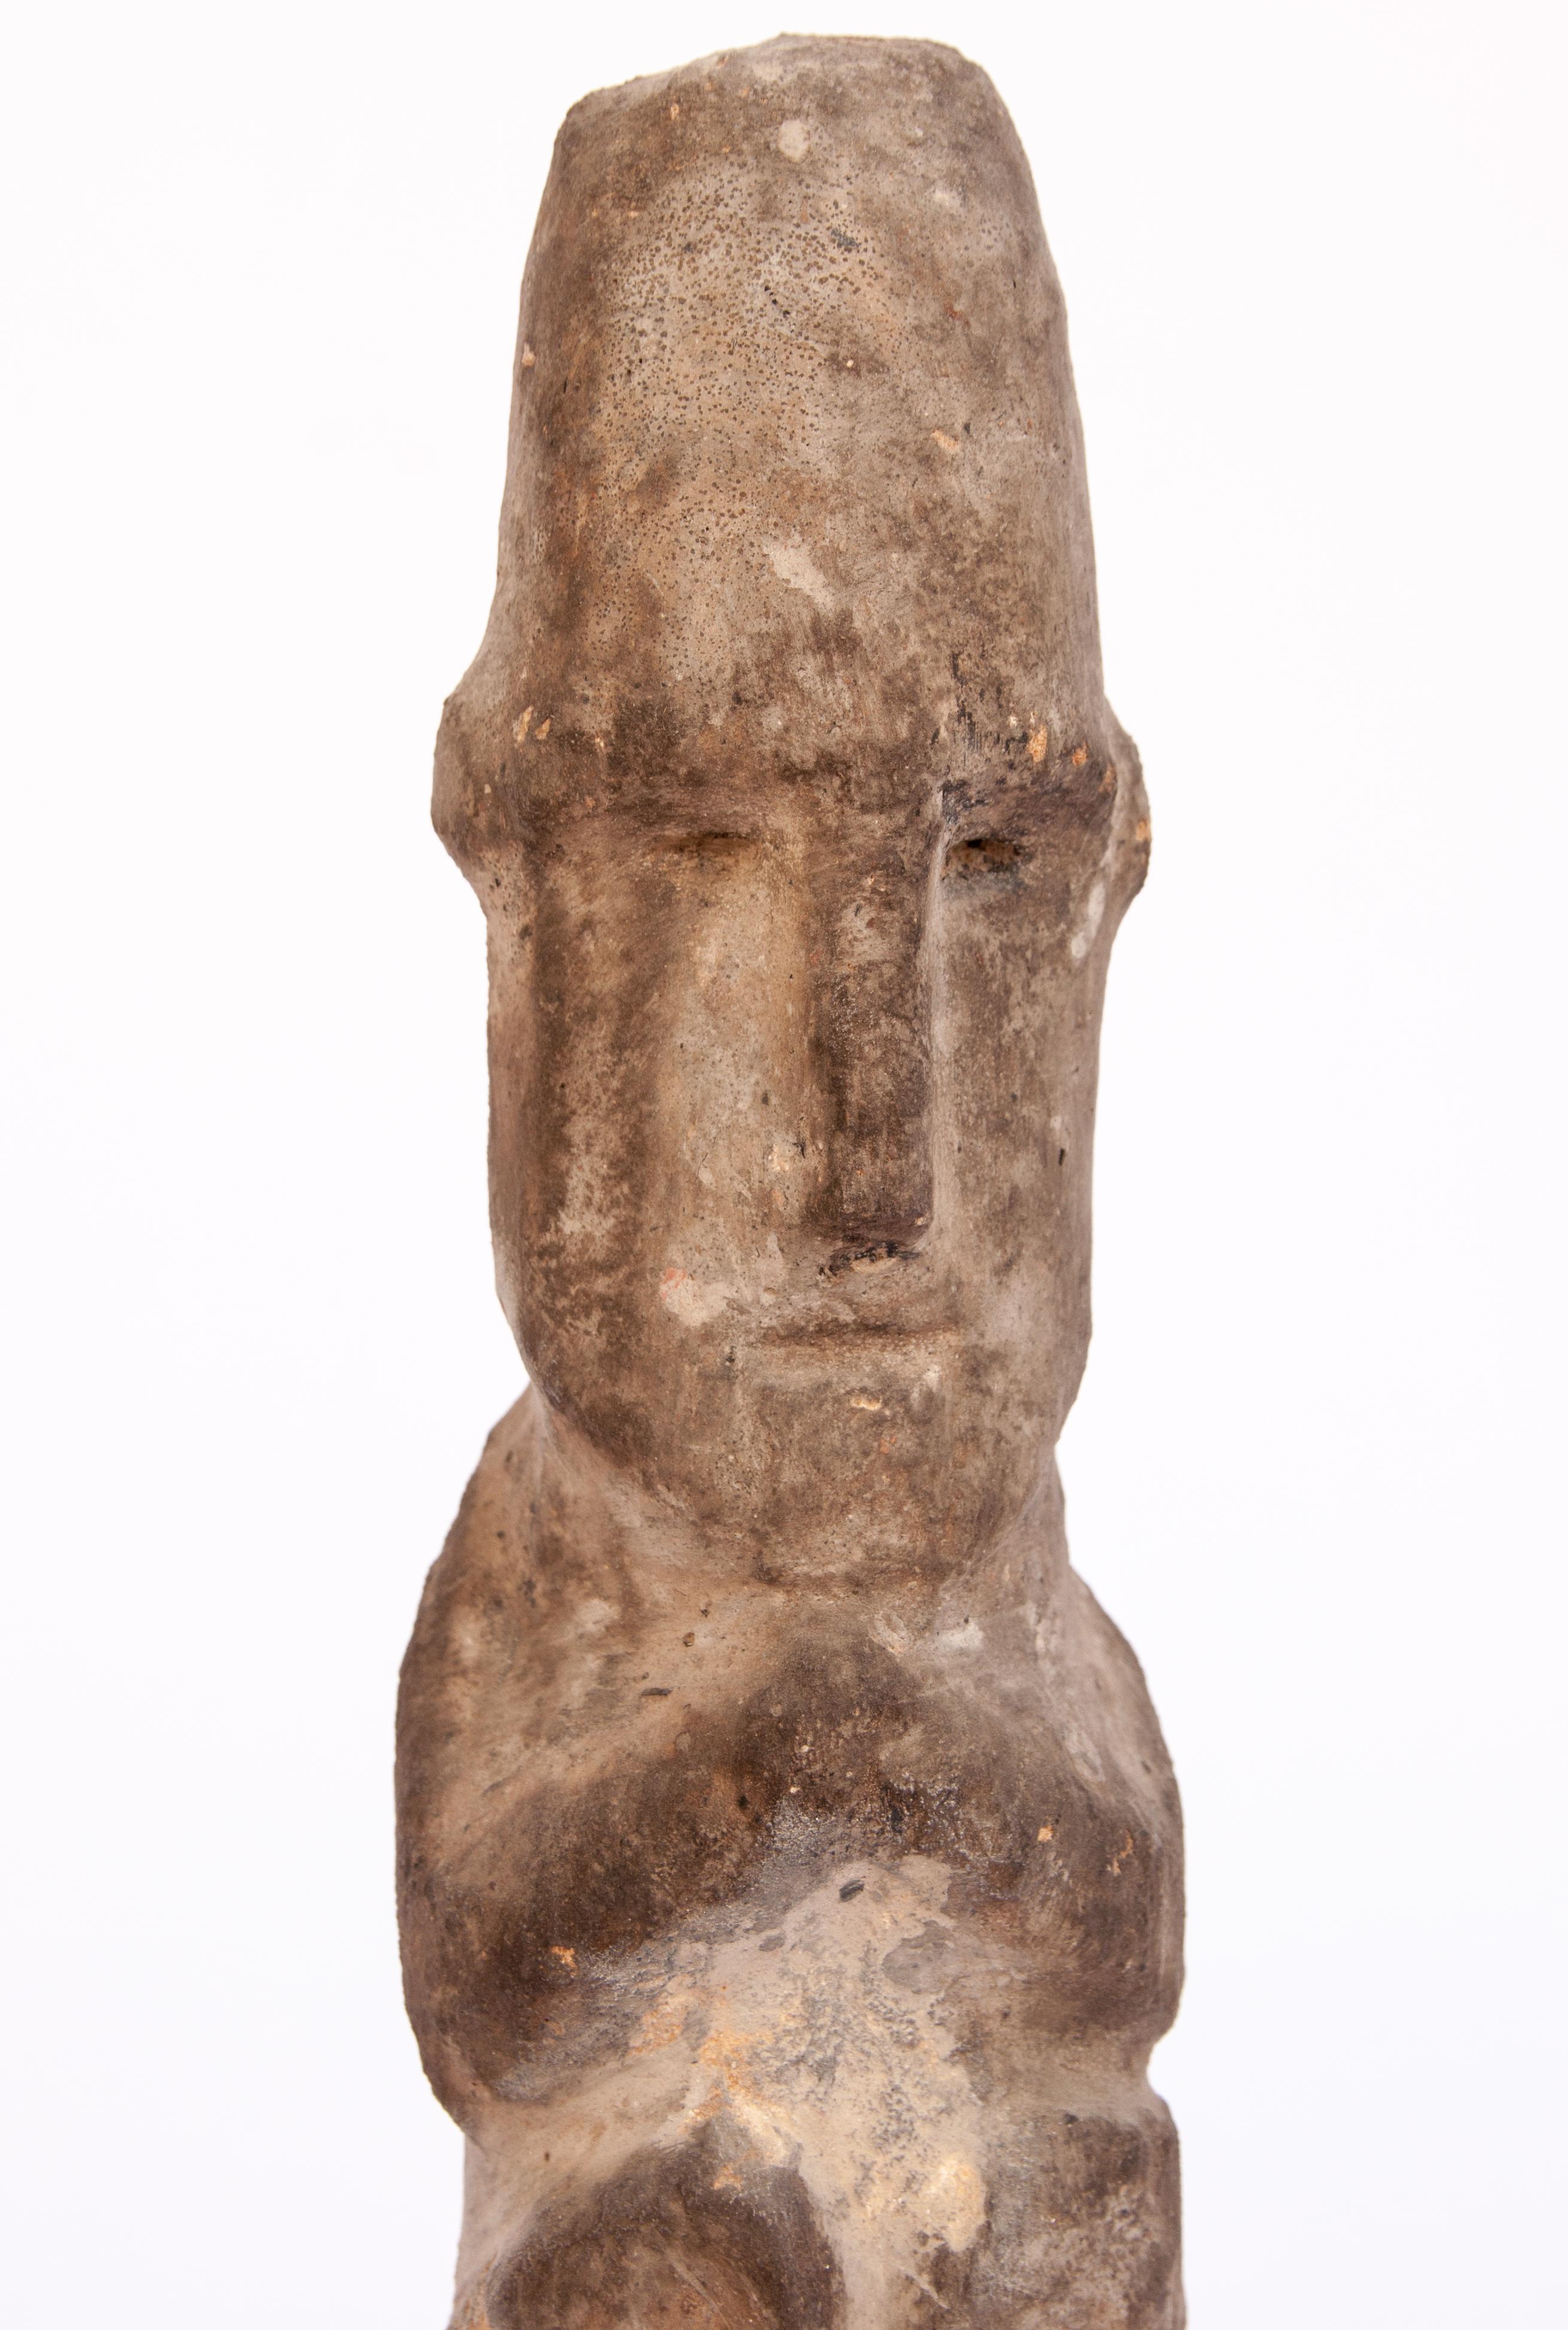 Tribal Stone Figure from West Nepal, Early to Mid-20th Century 4